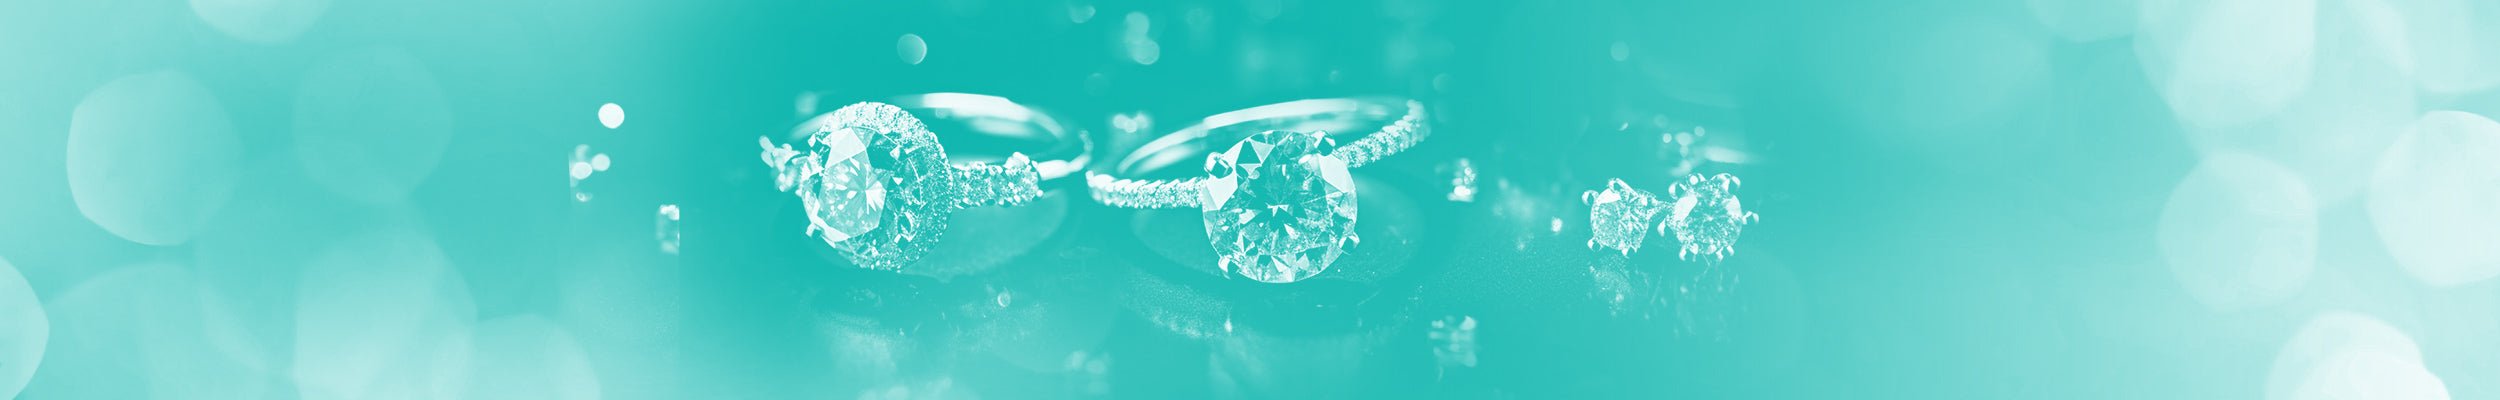 Rings and earrings lying on their sides on a teal background.